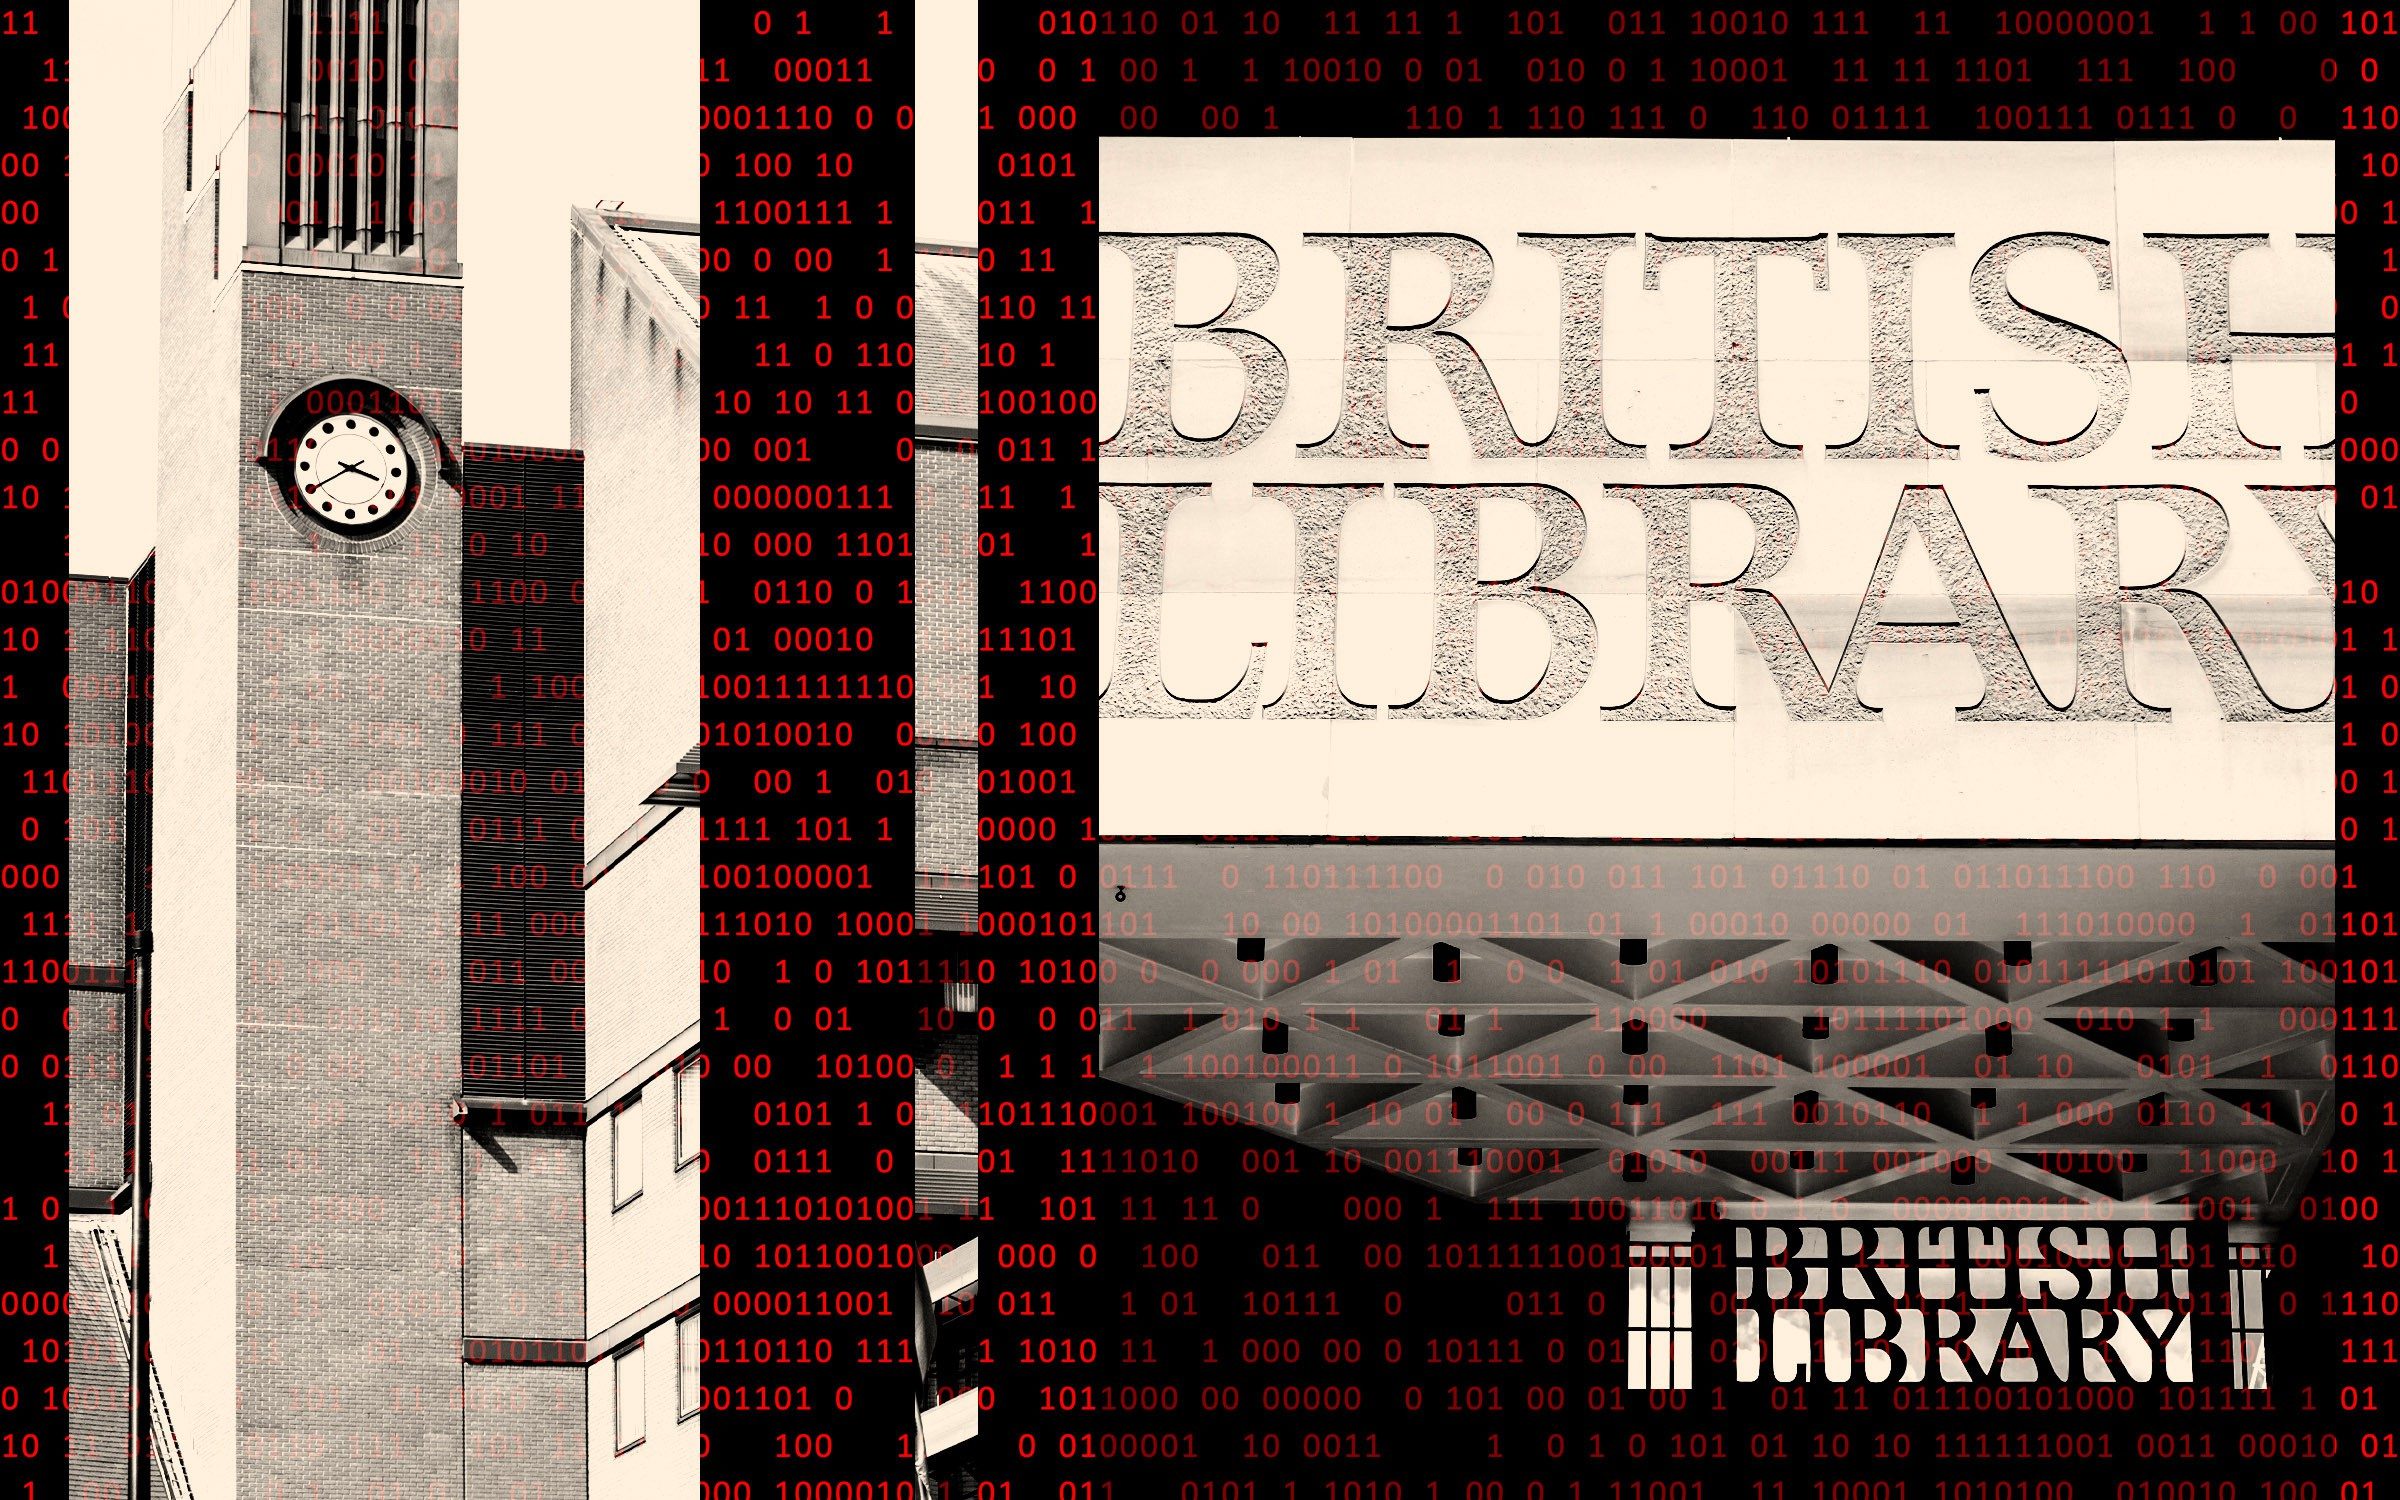 jk rowling’s personal data could have been compromised in british library cyber attack